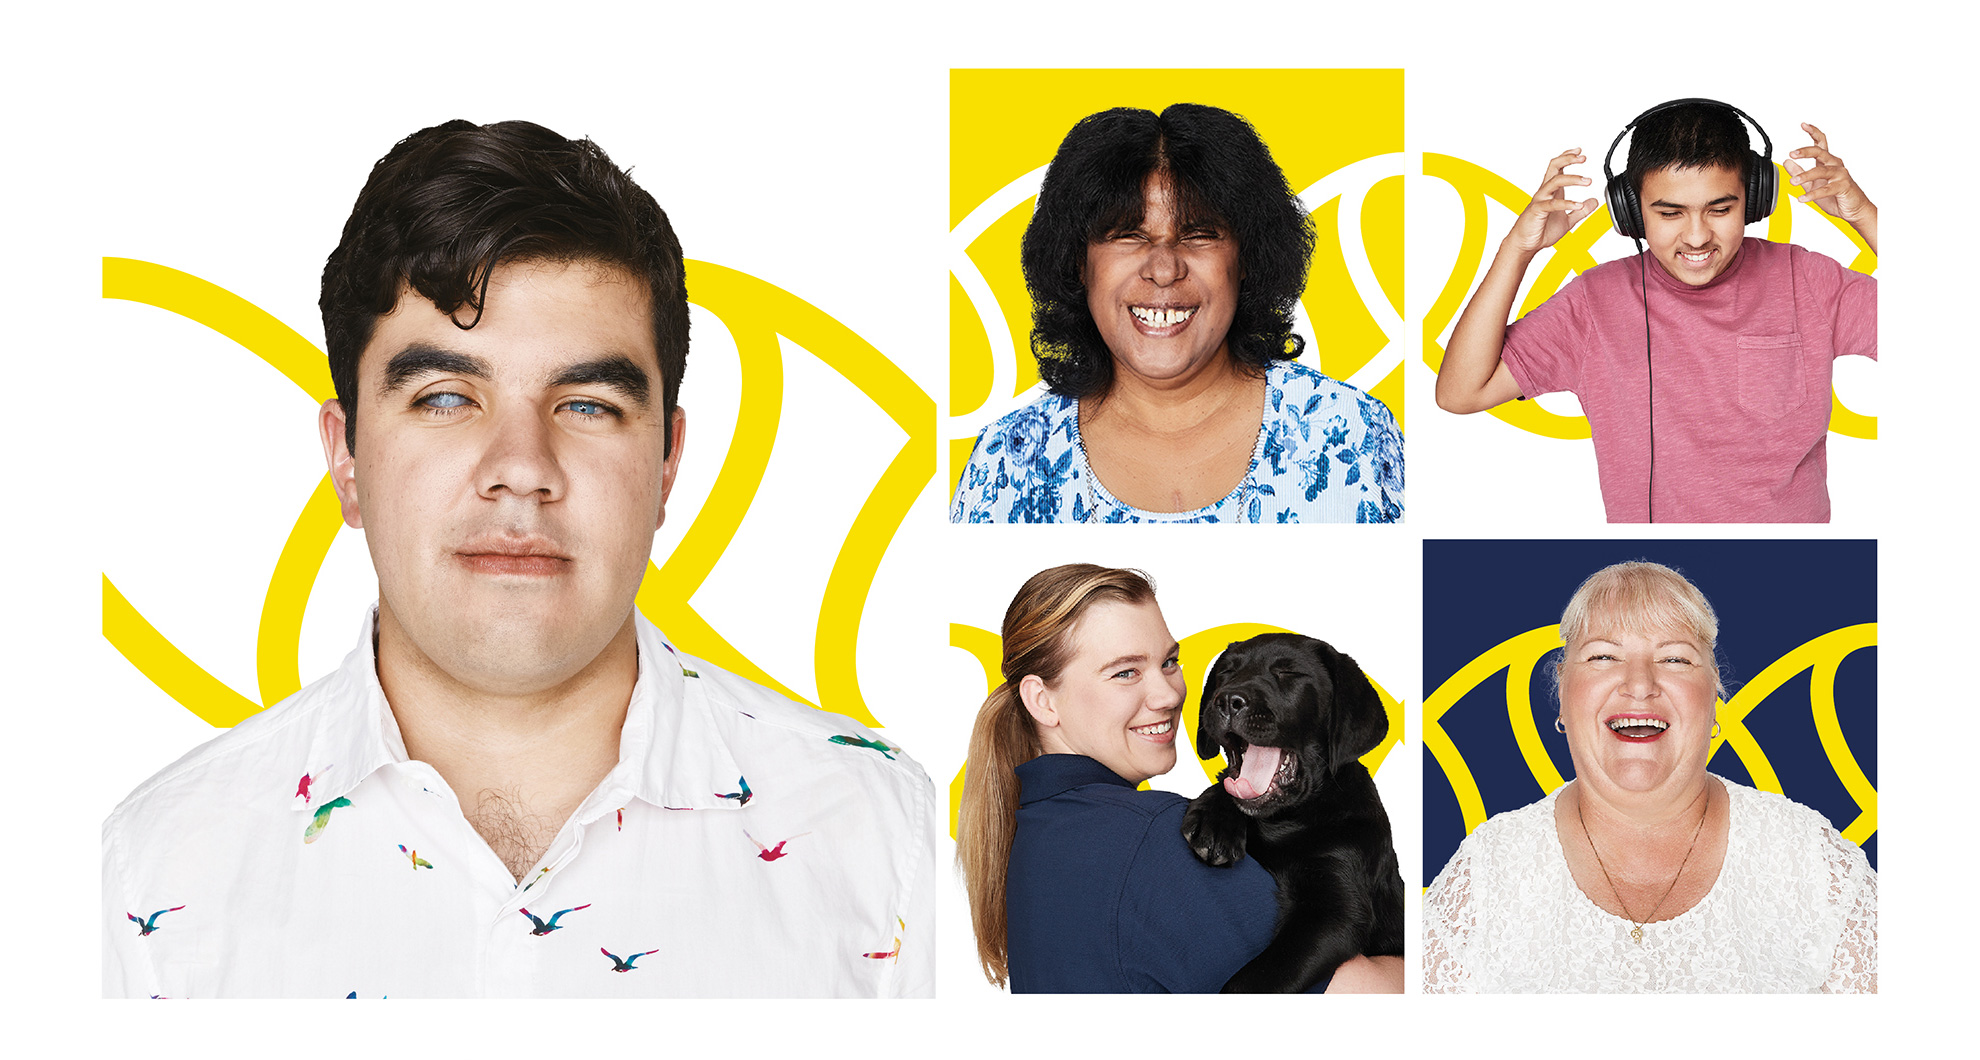  Collage of 5 photos, includes Santiago - client, Jayna - client, Amish - client, Debra - volunteer and Brit - staff member holding a black Labrador puppy.